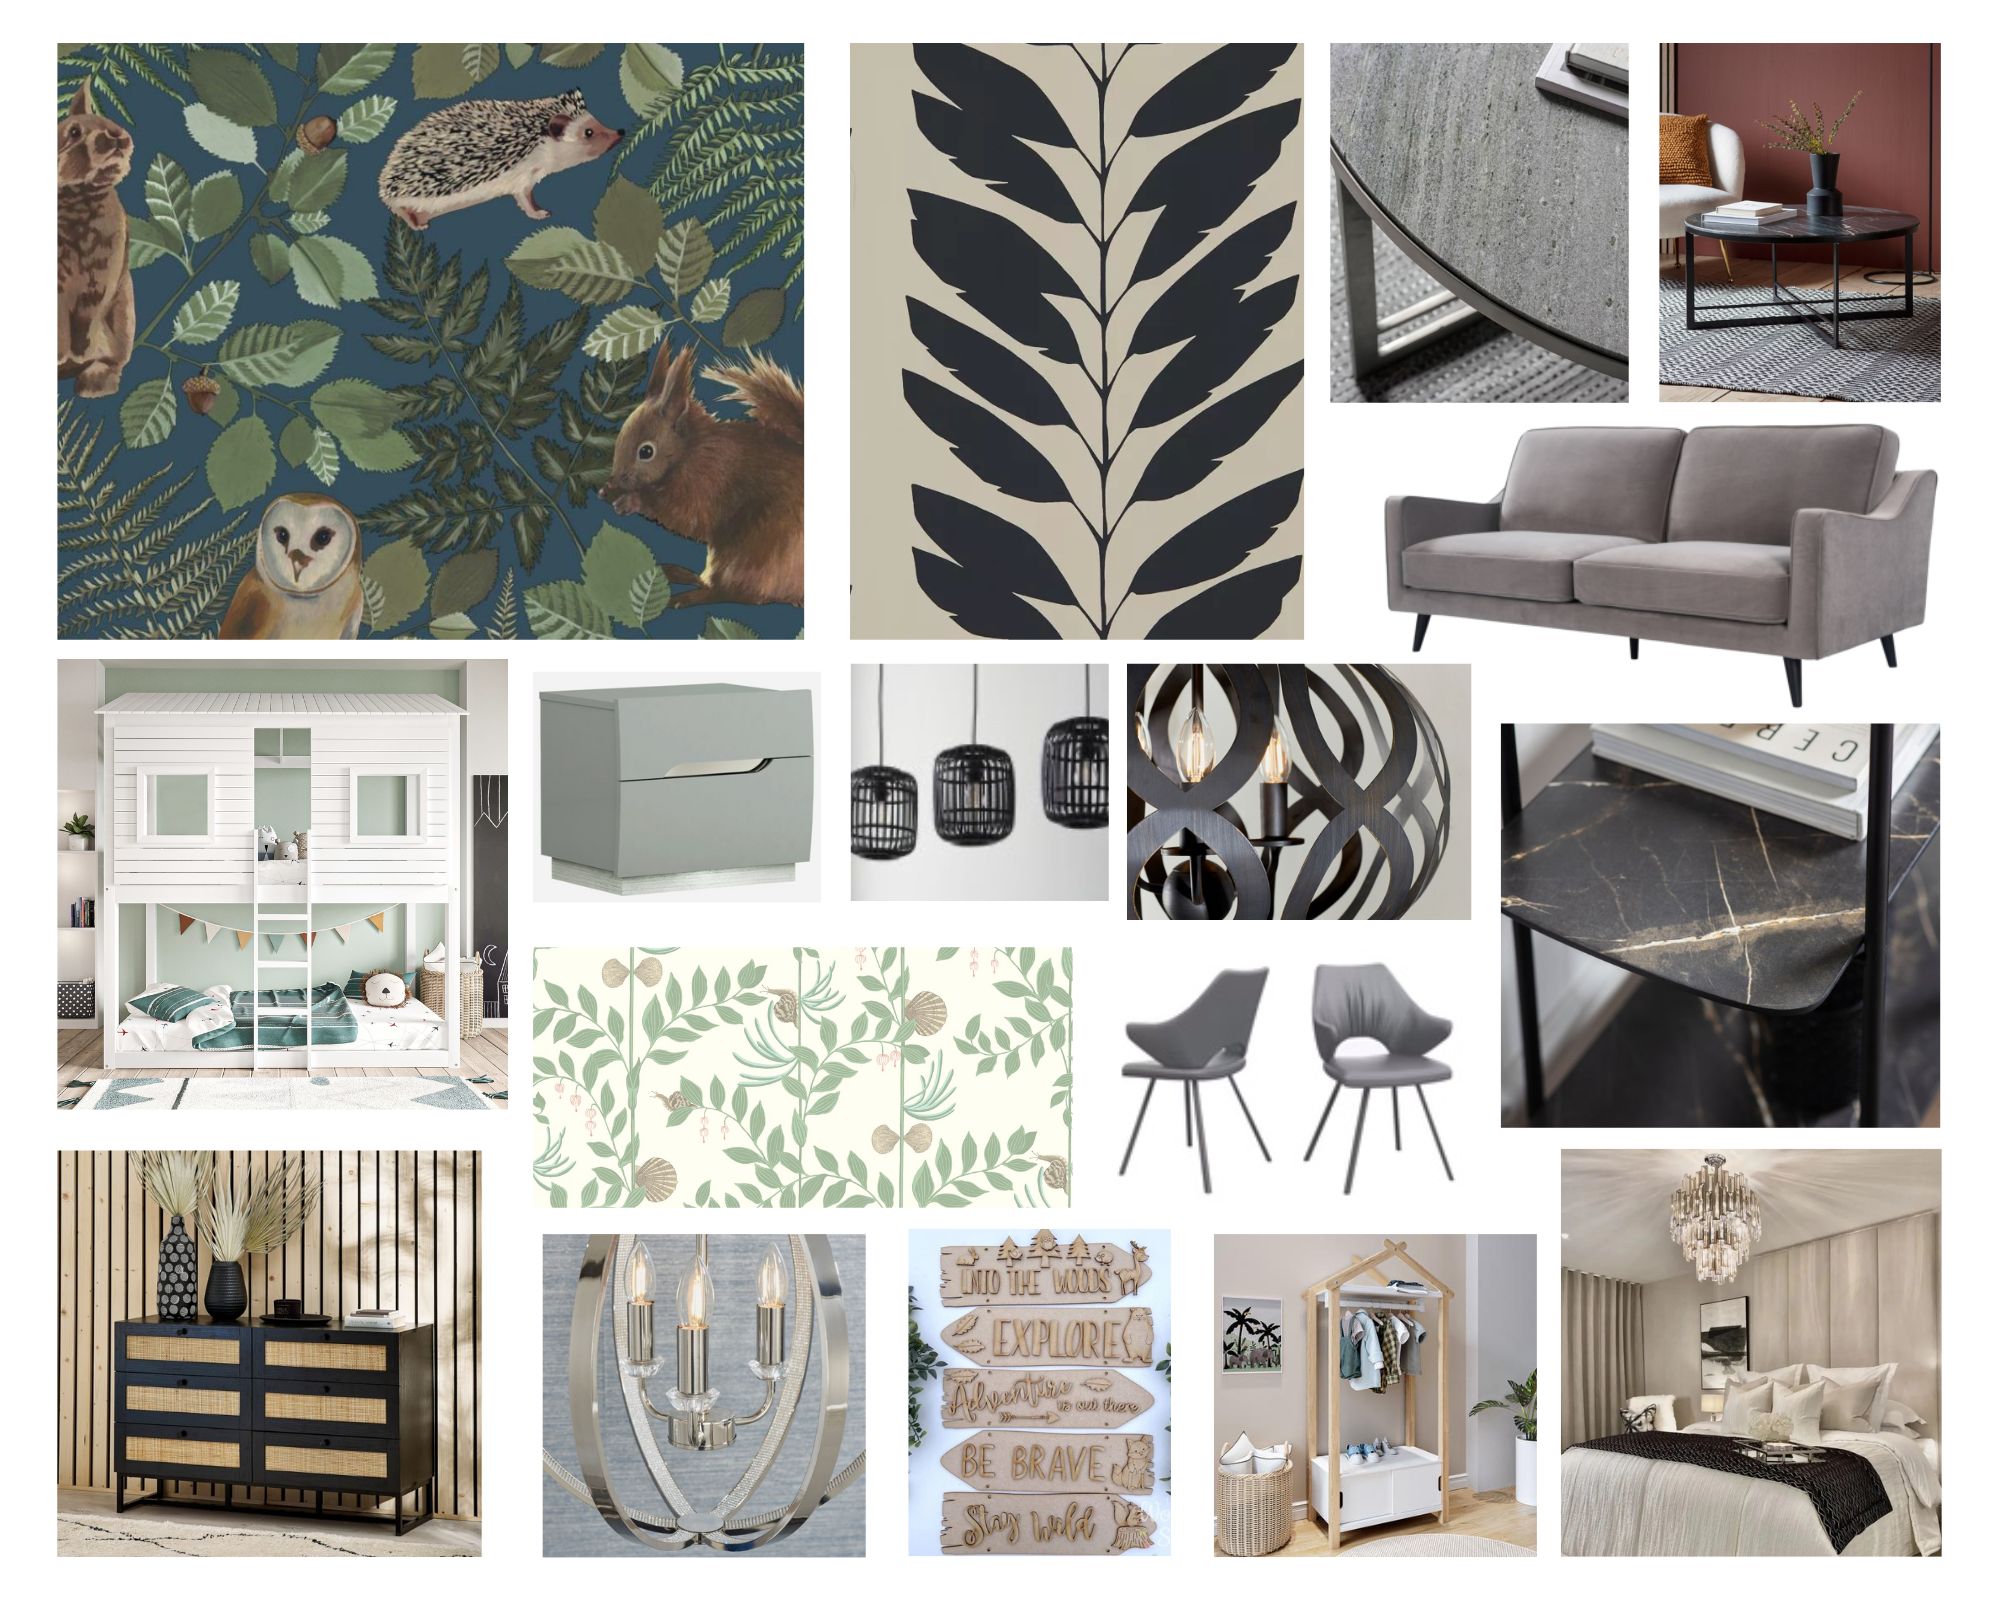 A mood board showcasing the themes that make up Jeanette's design choices.